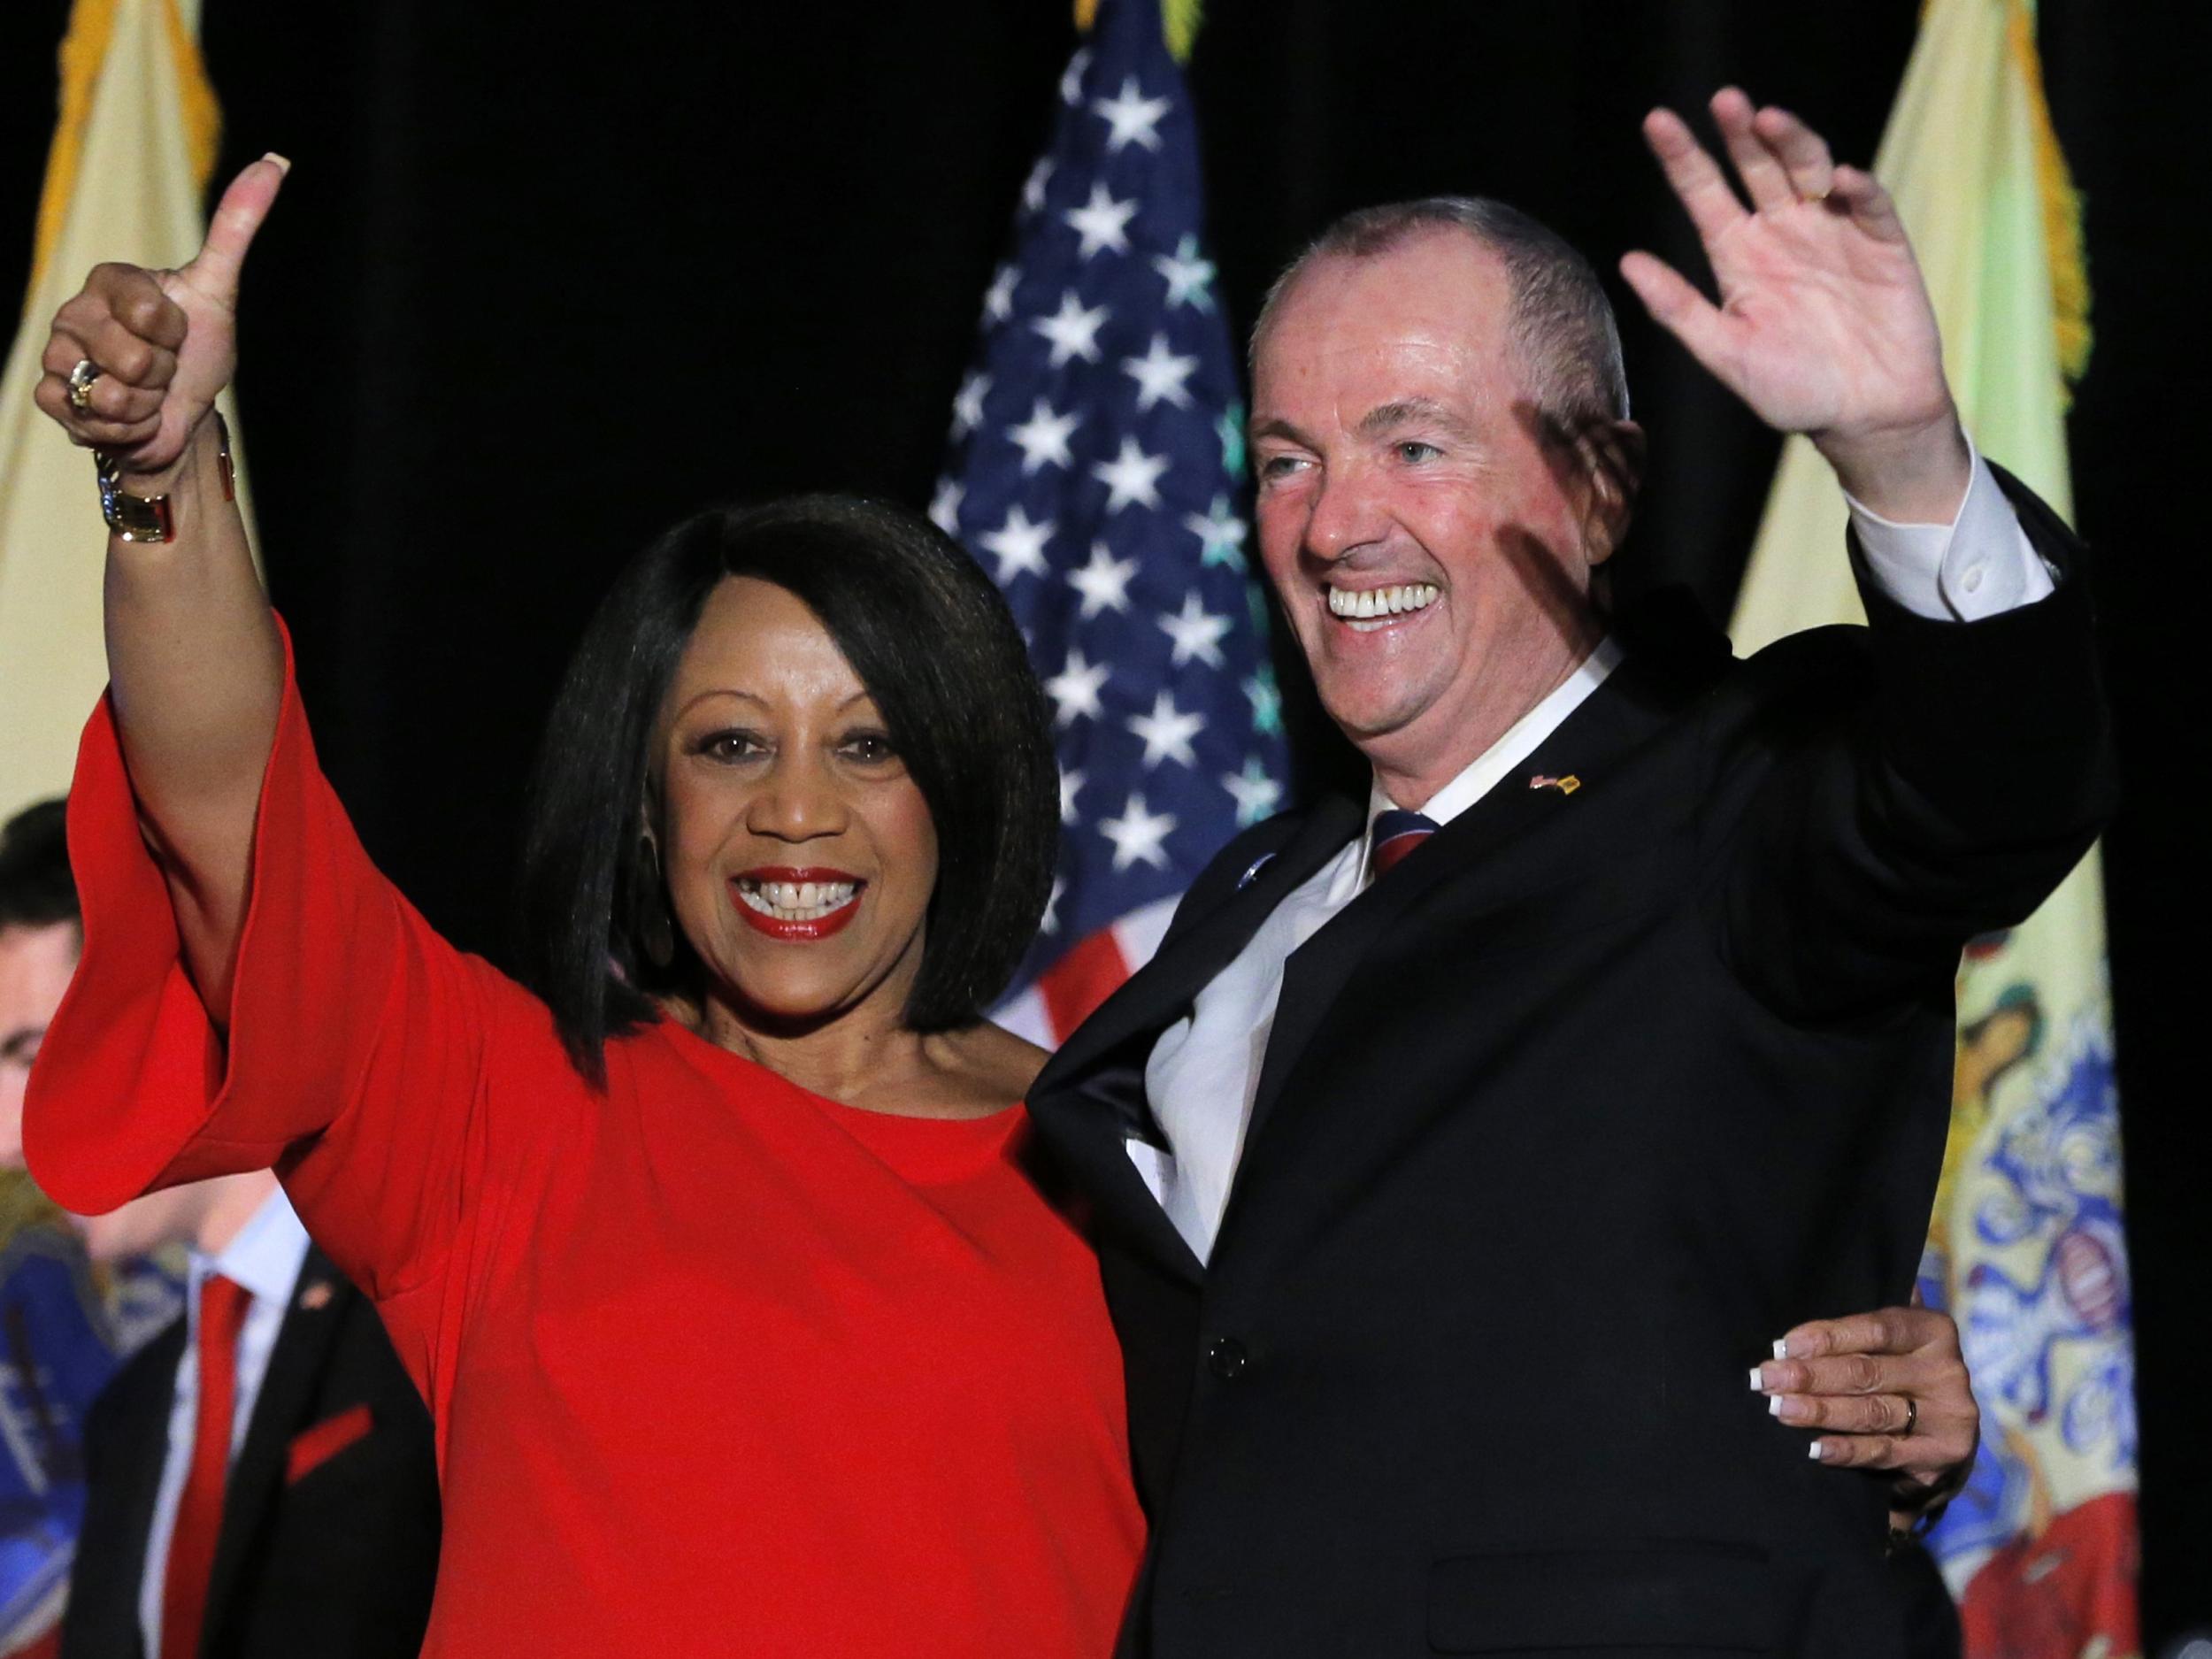 Phil Murphy celebrates with his running mate, Lieutenant Governor-elect Sheila Oliver, after he was elected Governor of New Jersey in Asbury Park